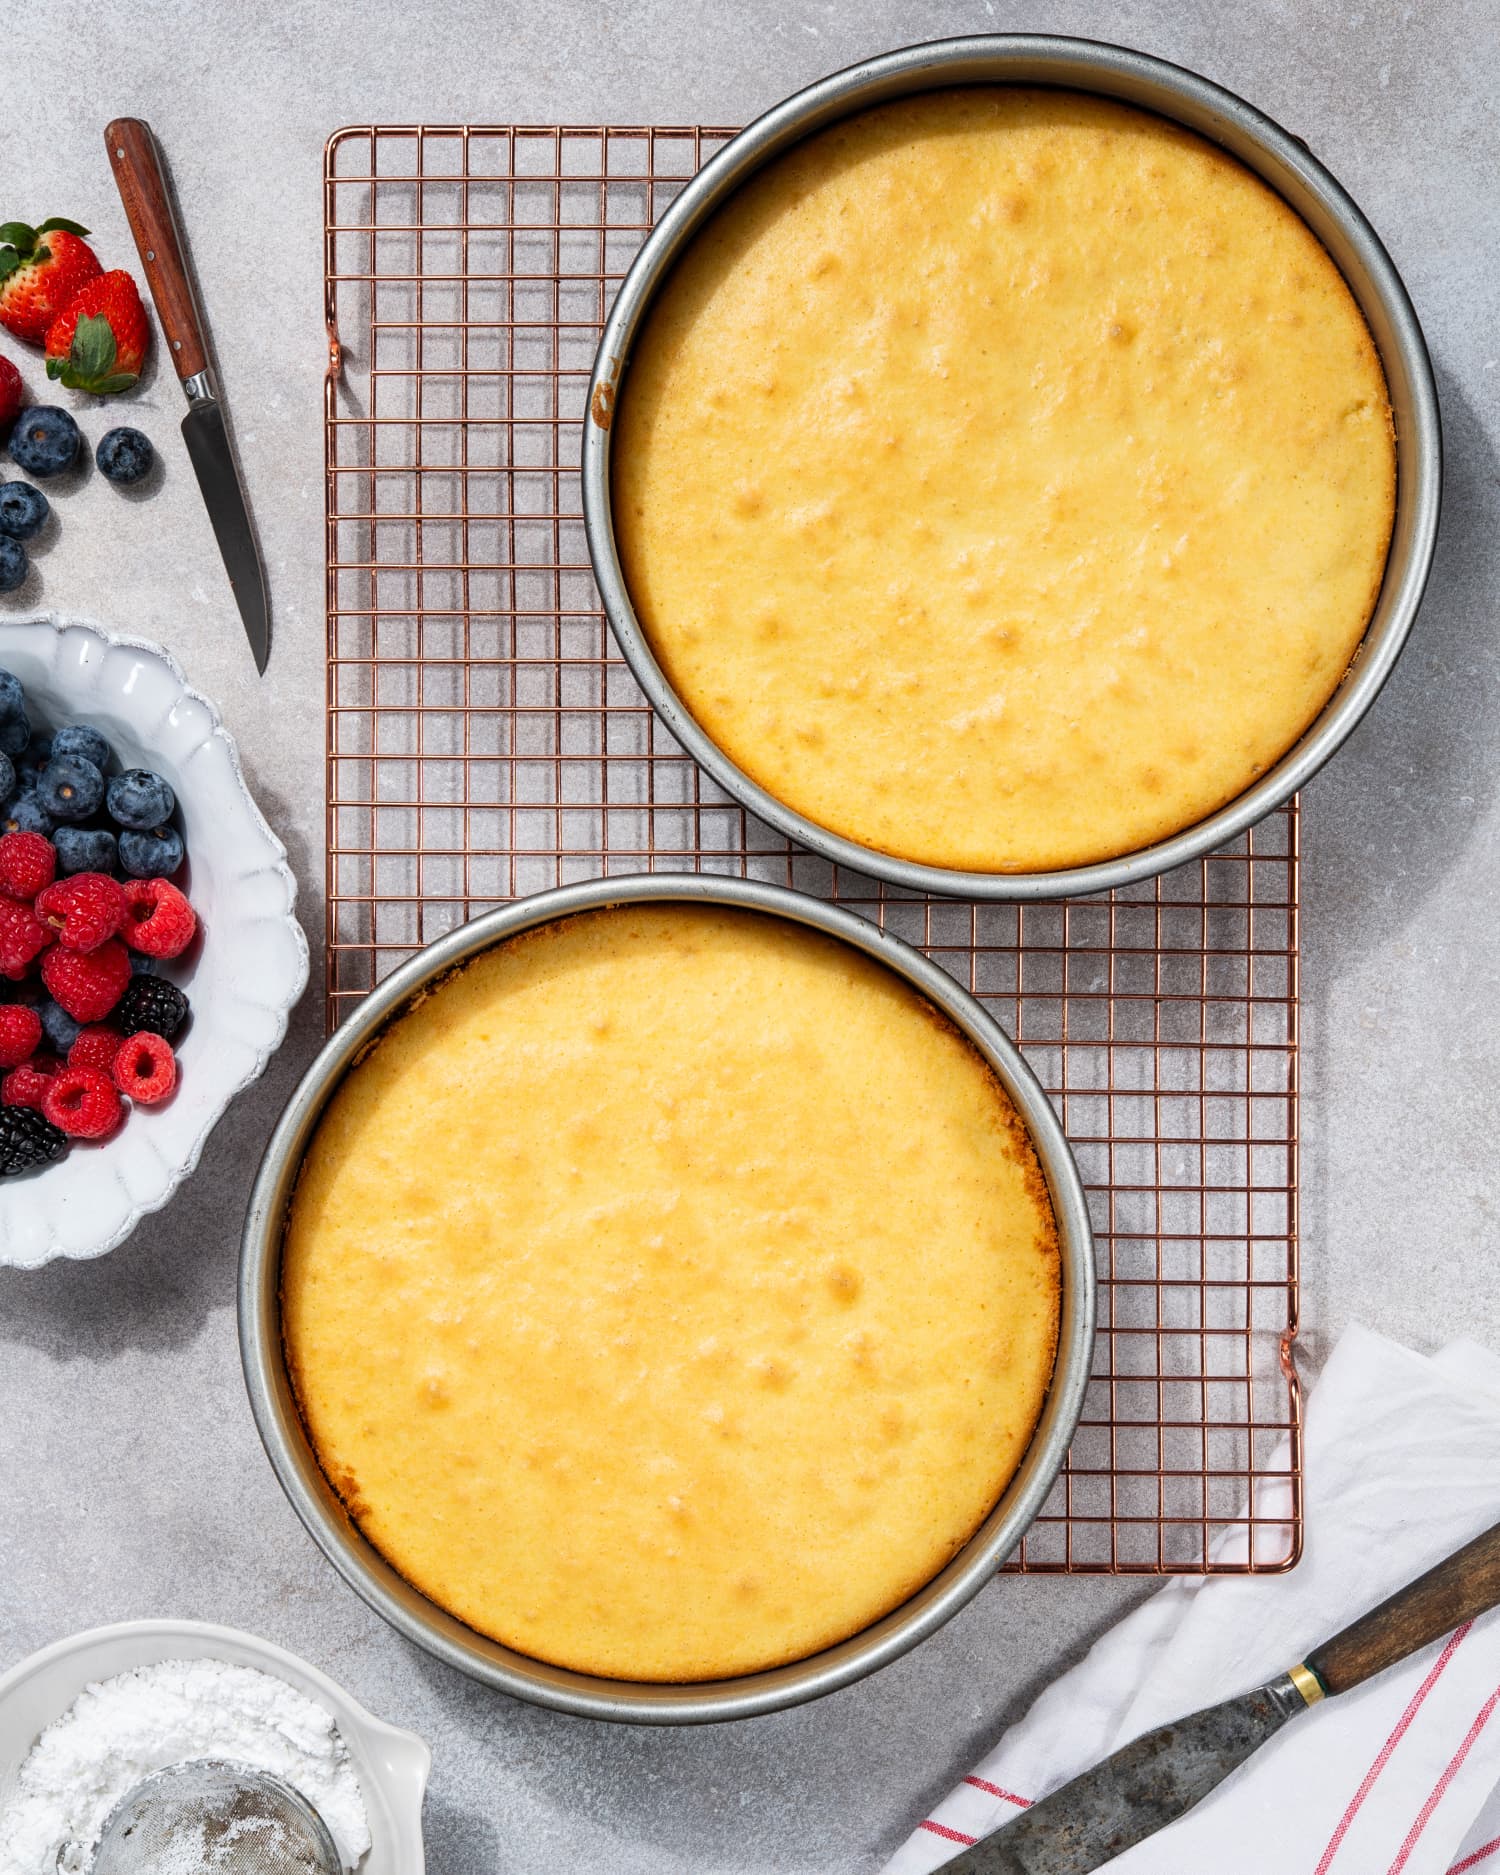 This Super-Simple 3-Ingredient Cake Uses One Thing You Probably Didn’t Expect